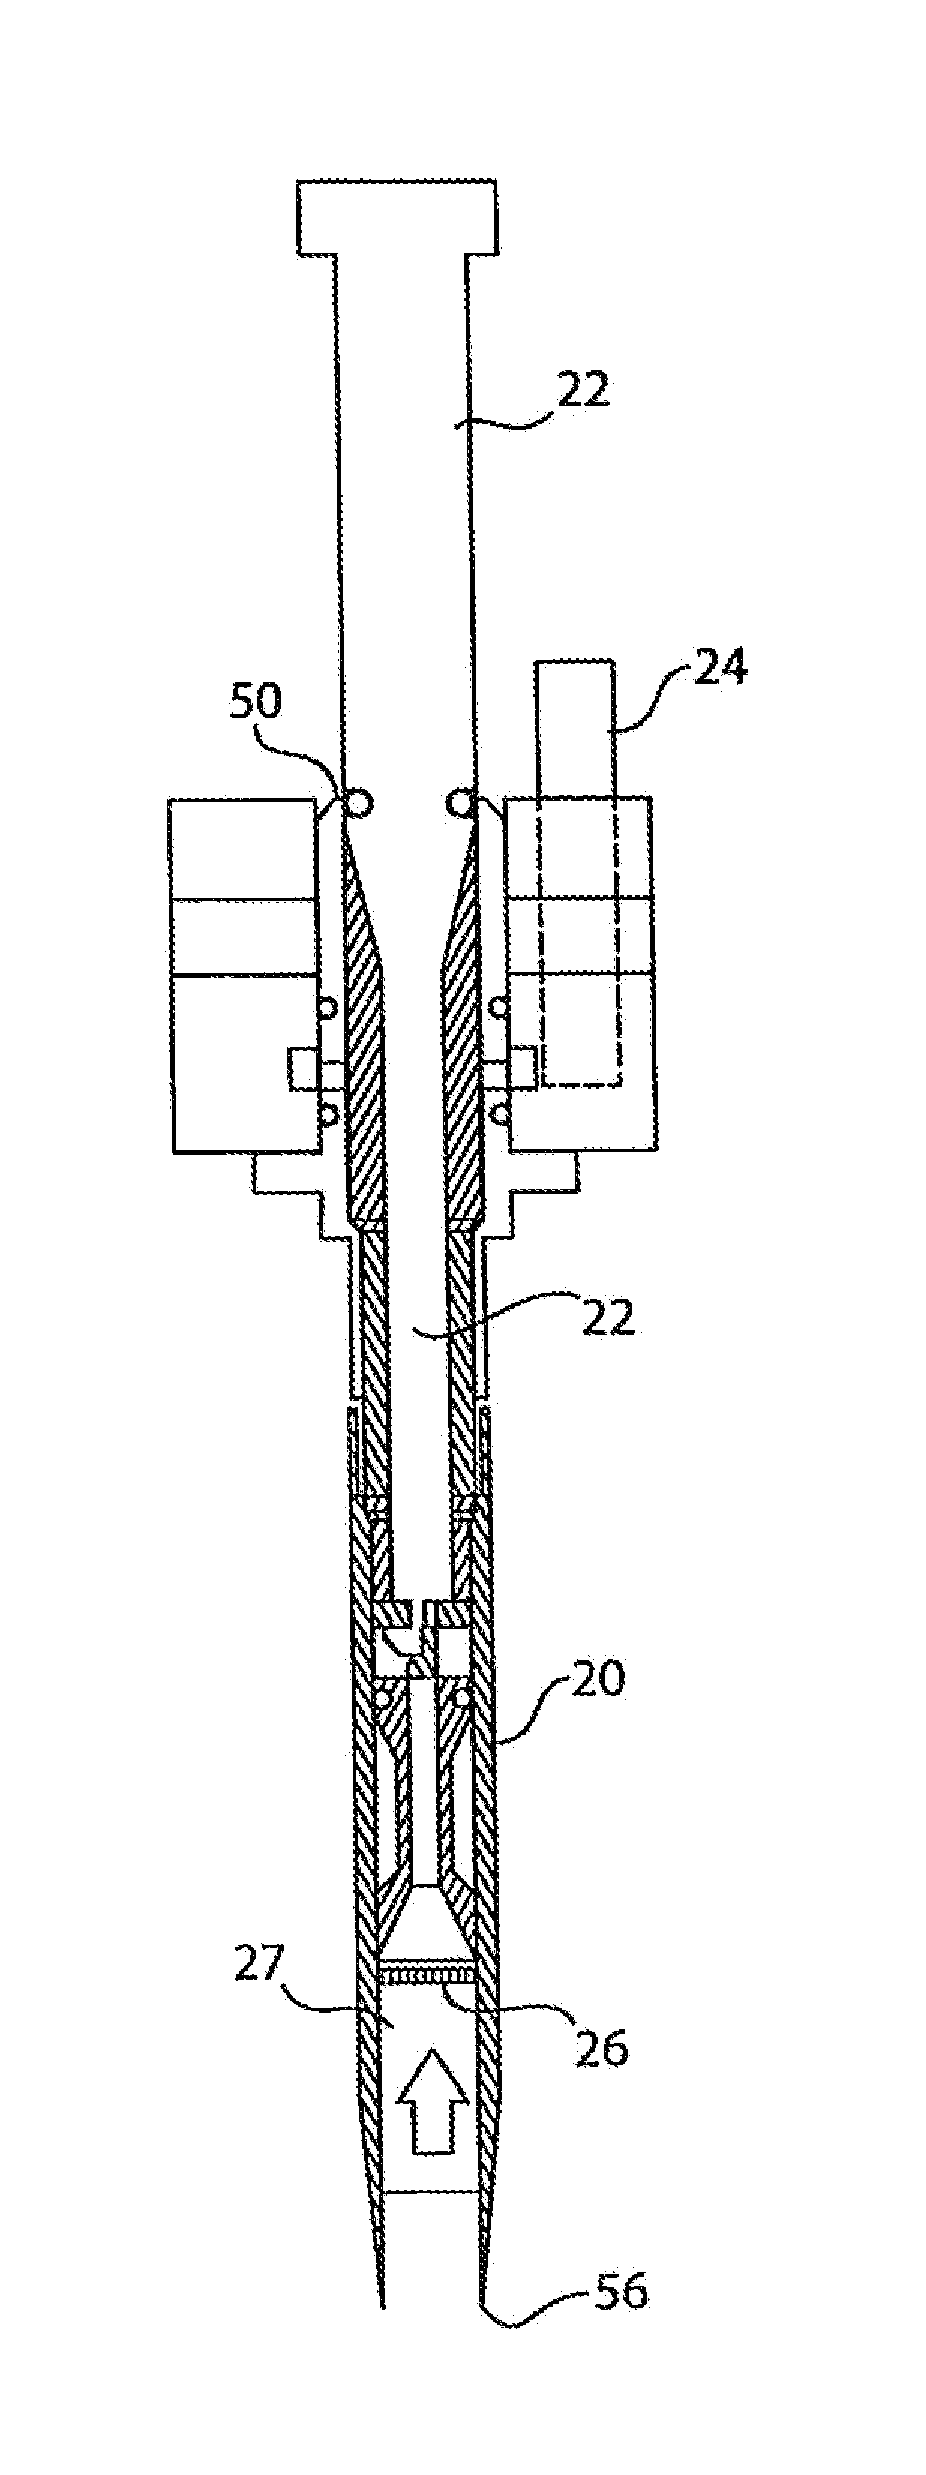 Dosator Apparatus for Filling a Capsule with Dry Powder